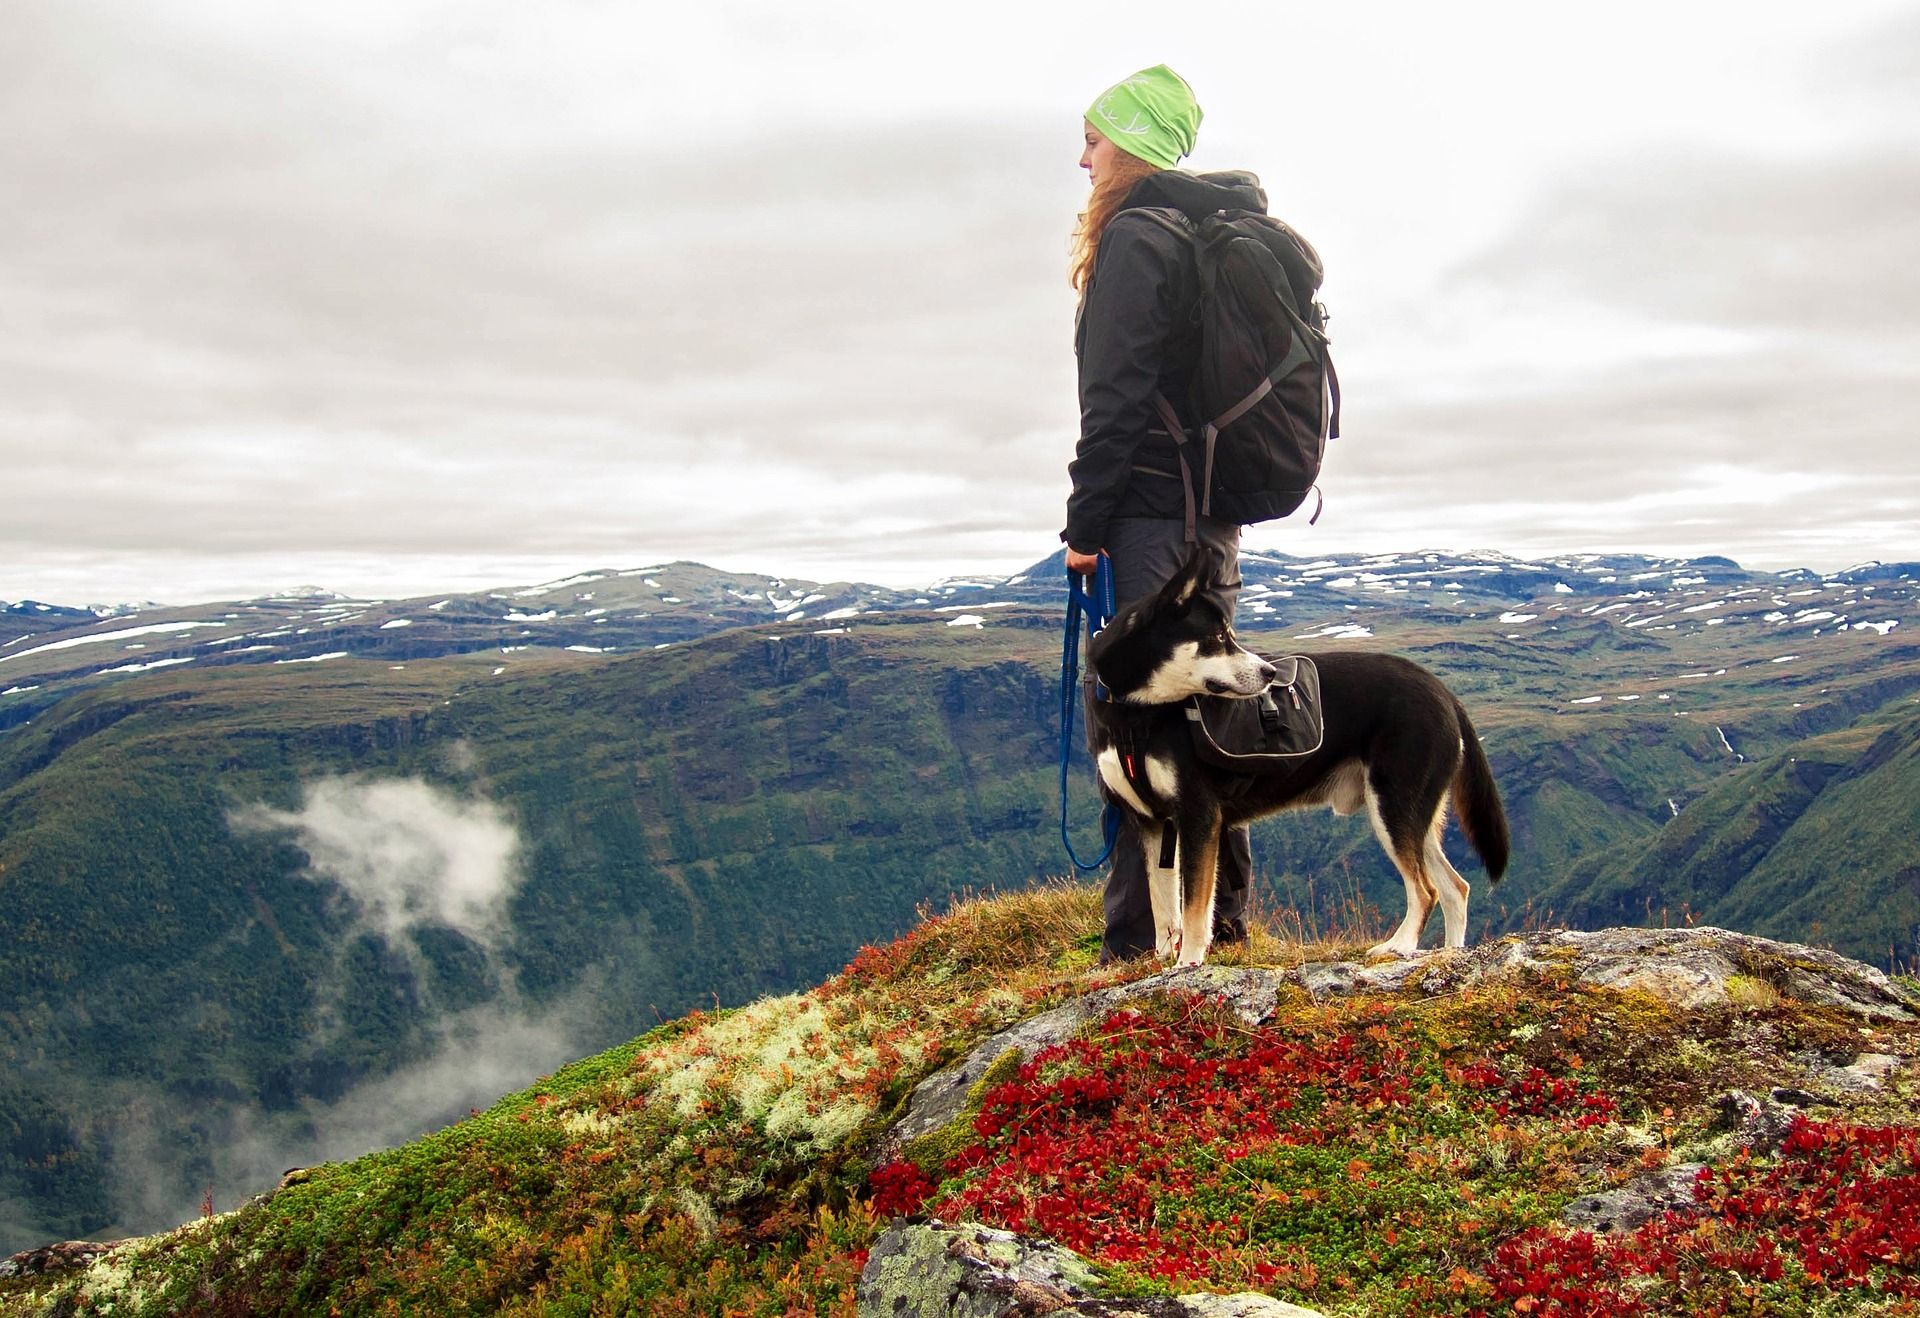 Hiker with dog at the top of a mountain